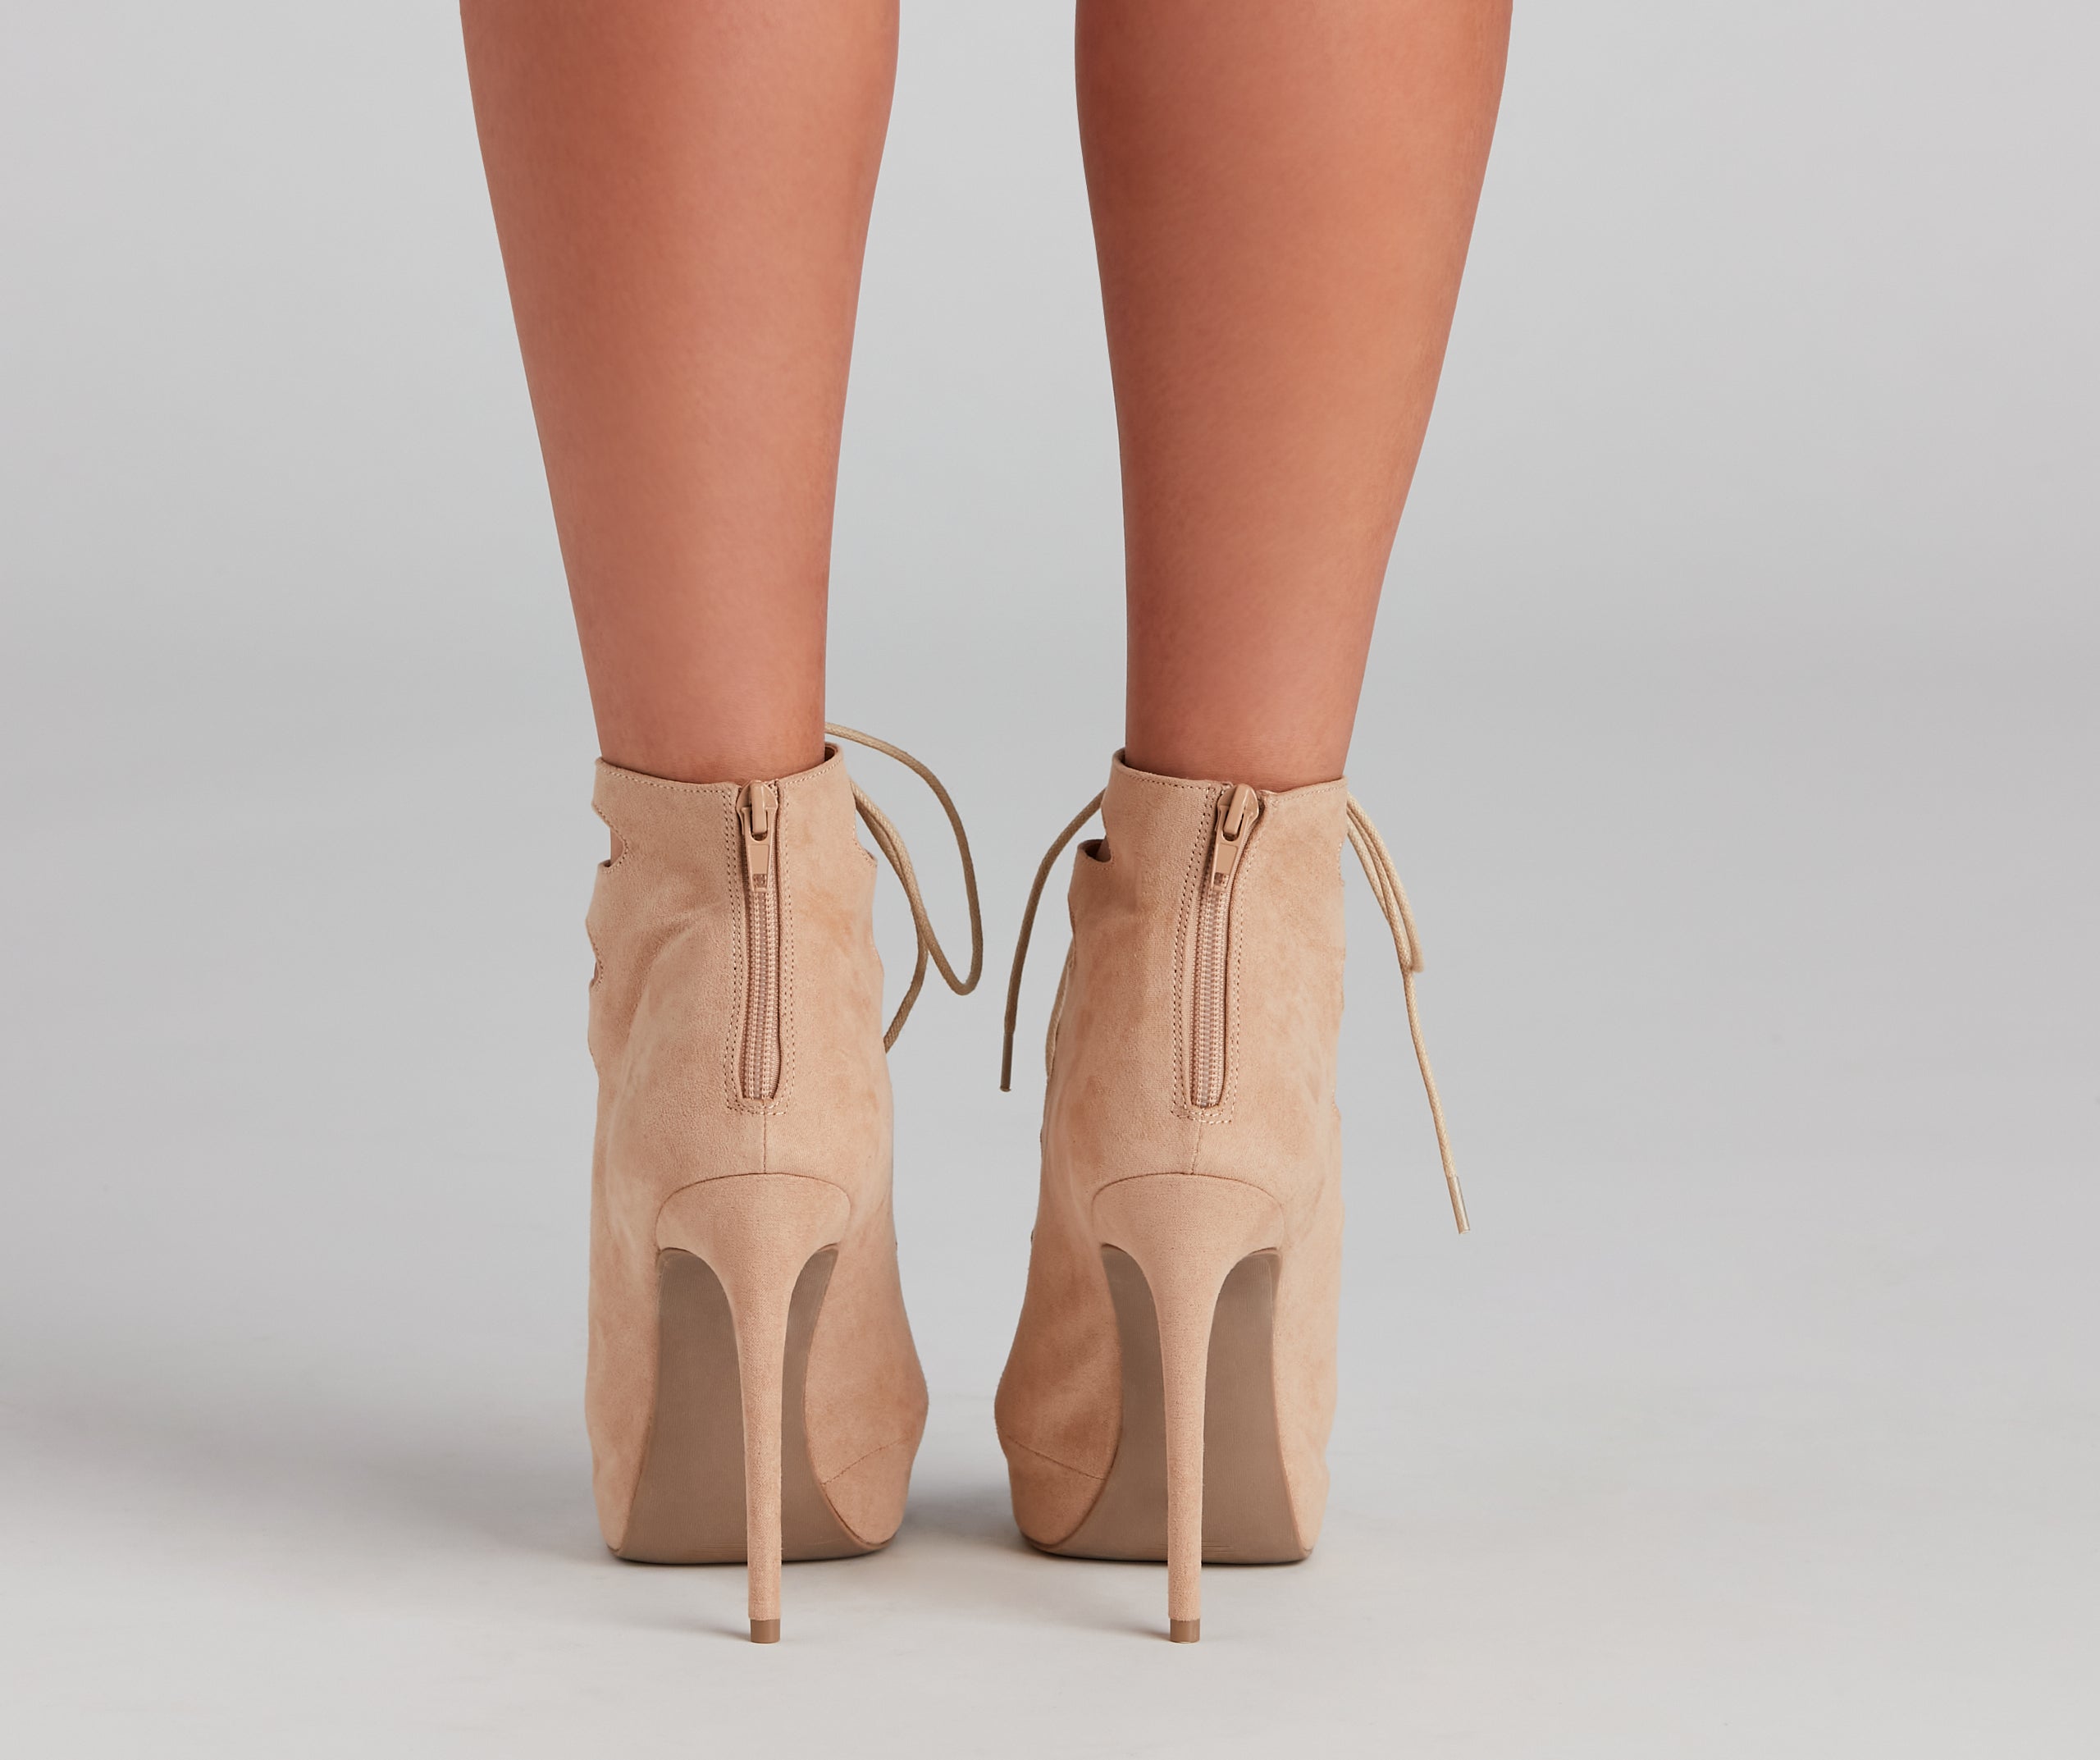 Chic Lace-Up Caged Stiletto Booties